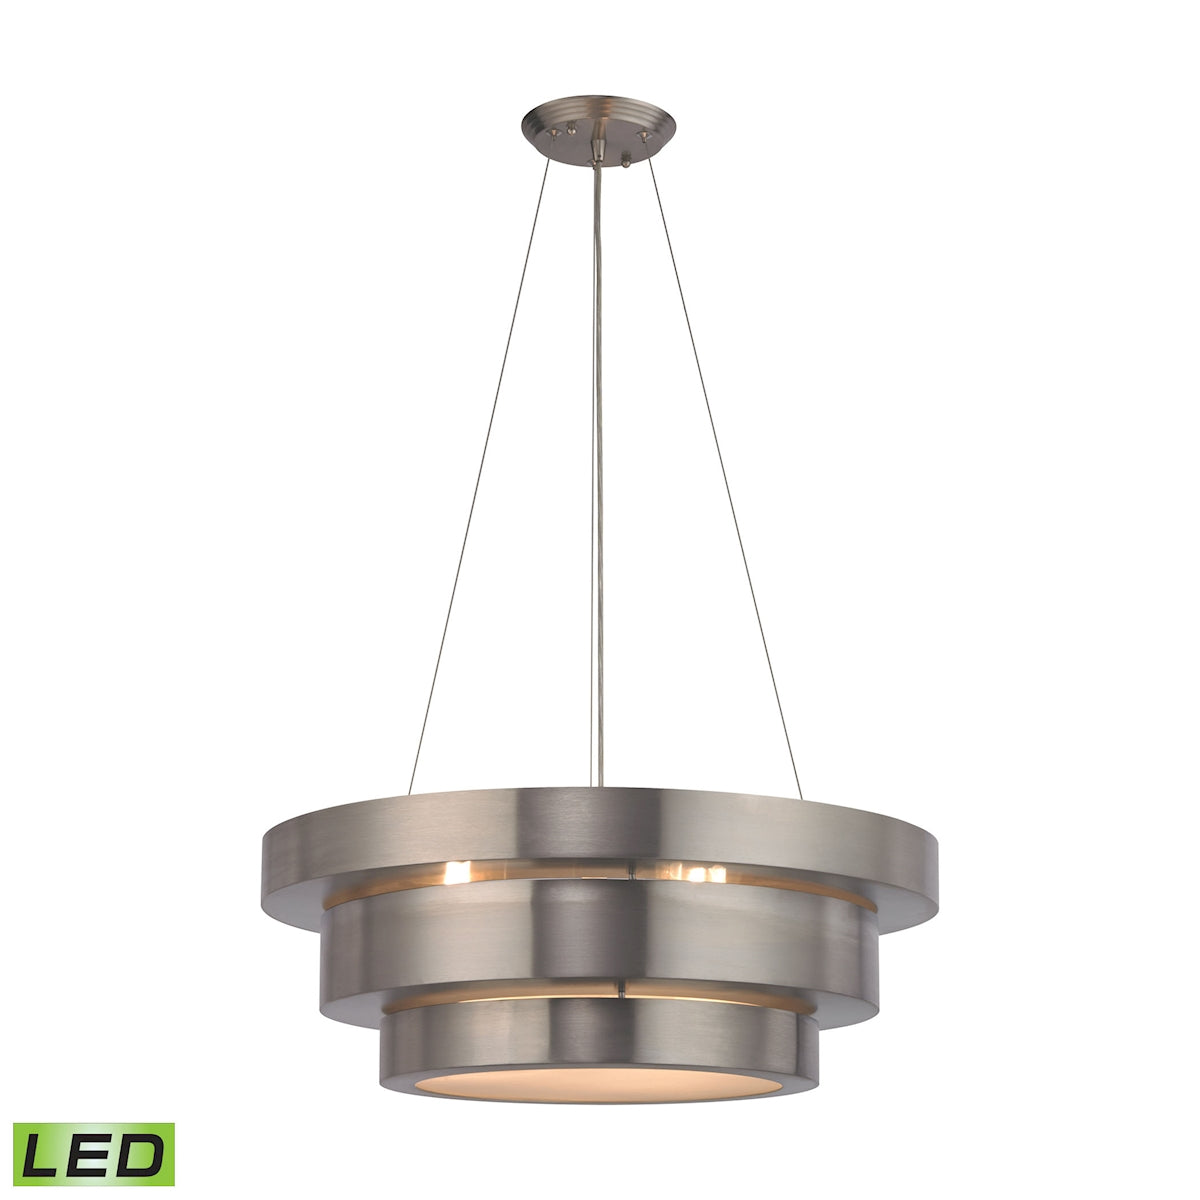 ELK Lighting 32225/3-LED Layers 3-Light Chandelier in Brushed Stainless with Frosted Glass Diffuser - Includes LED Bulbs